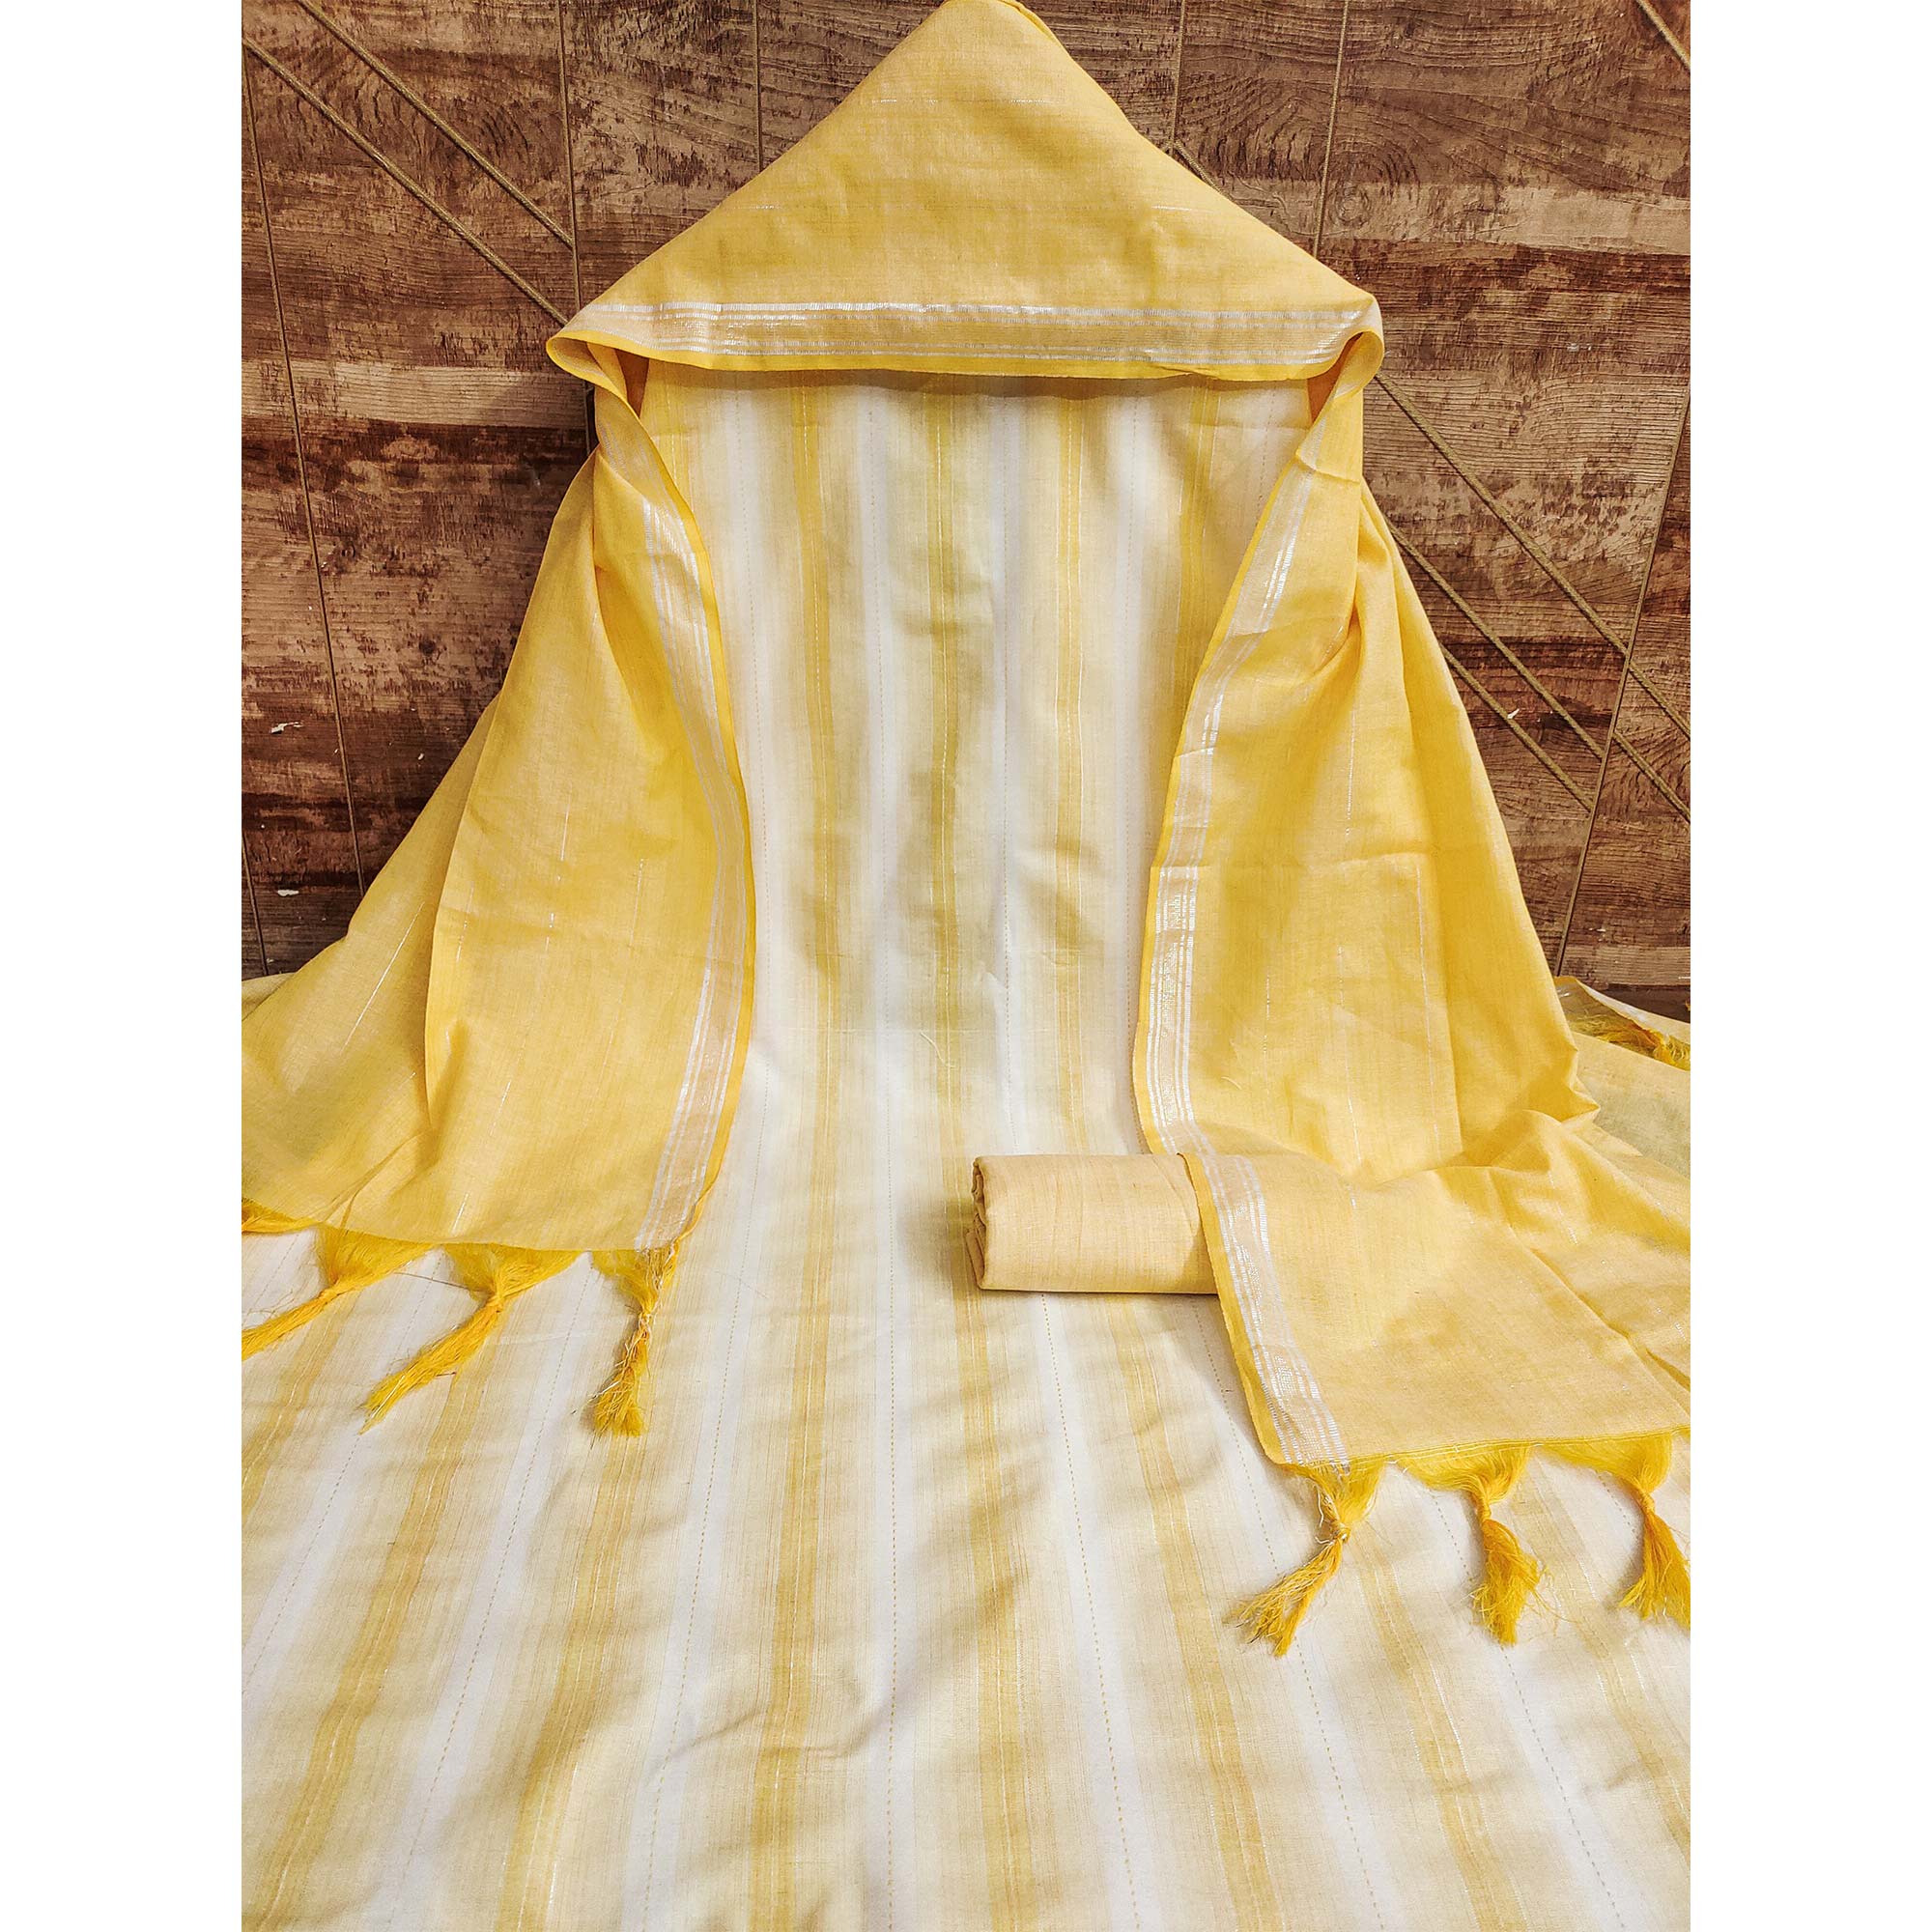 Yellow Woven Cotton Dress Material